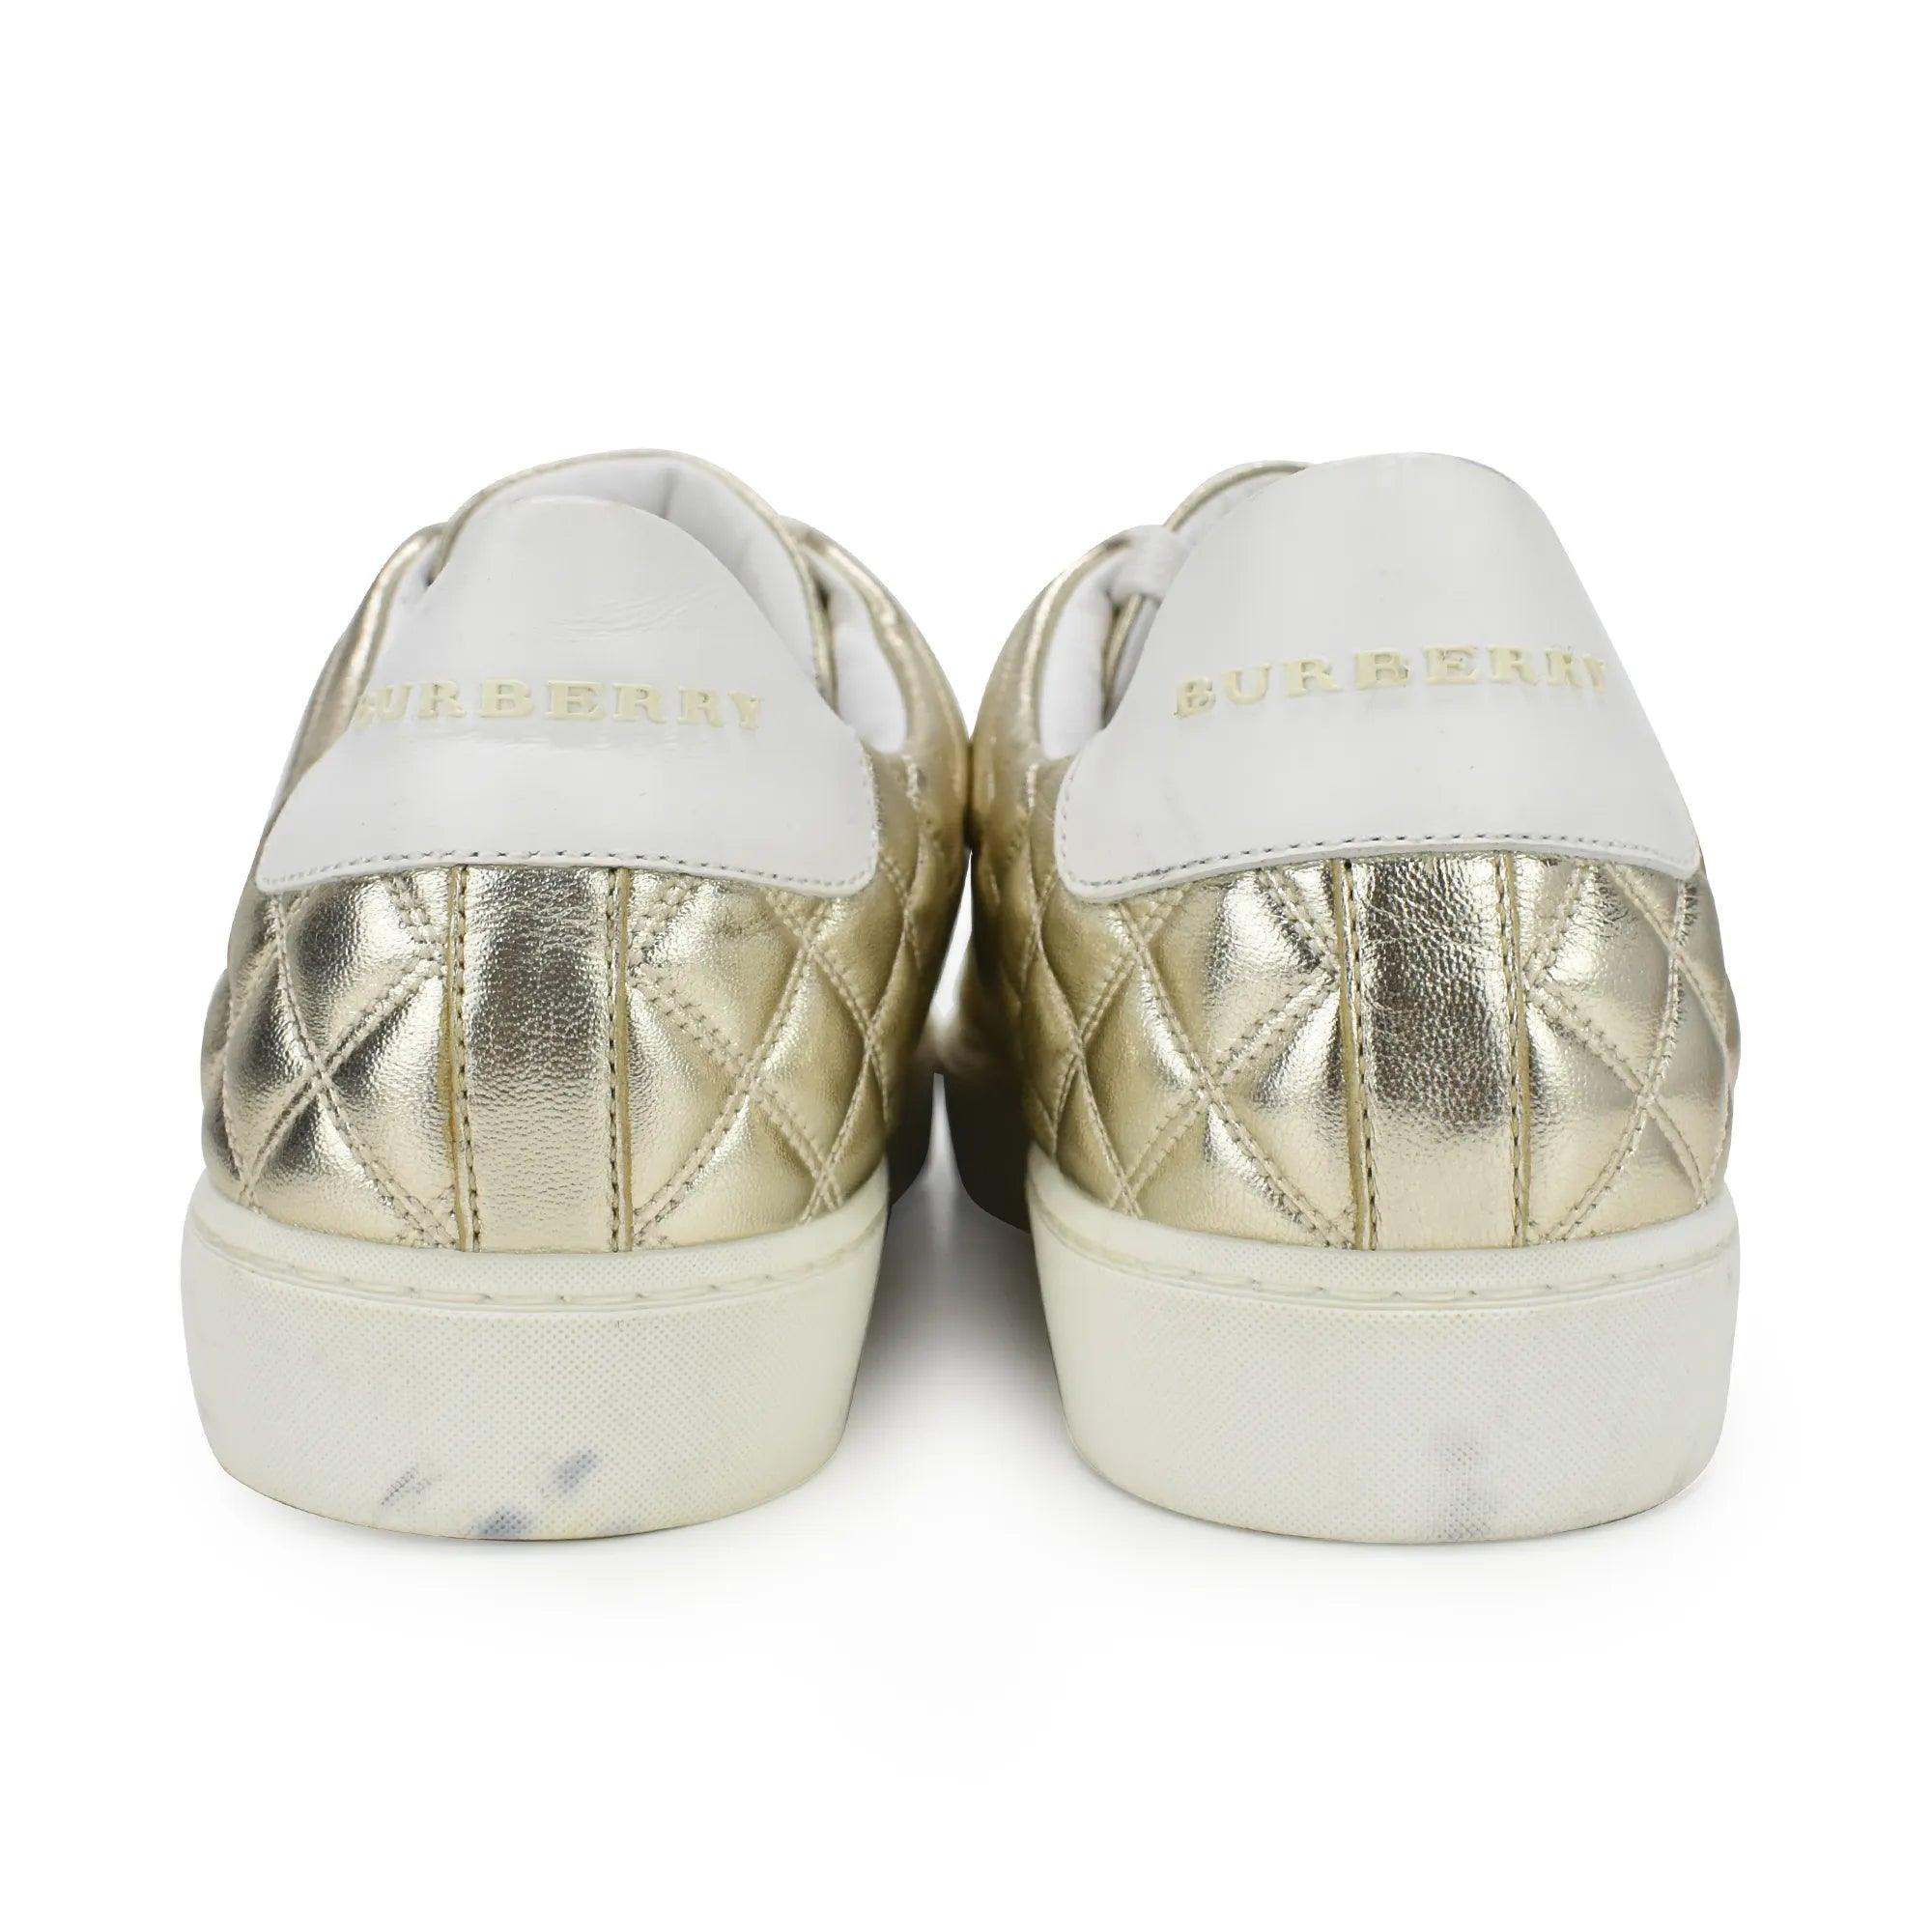 Burberry Sneakers - Women's 39 - Fashionably Yours